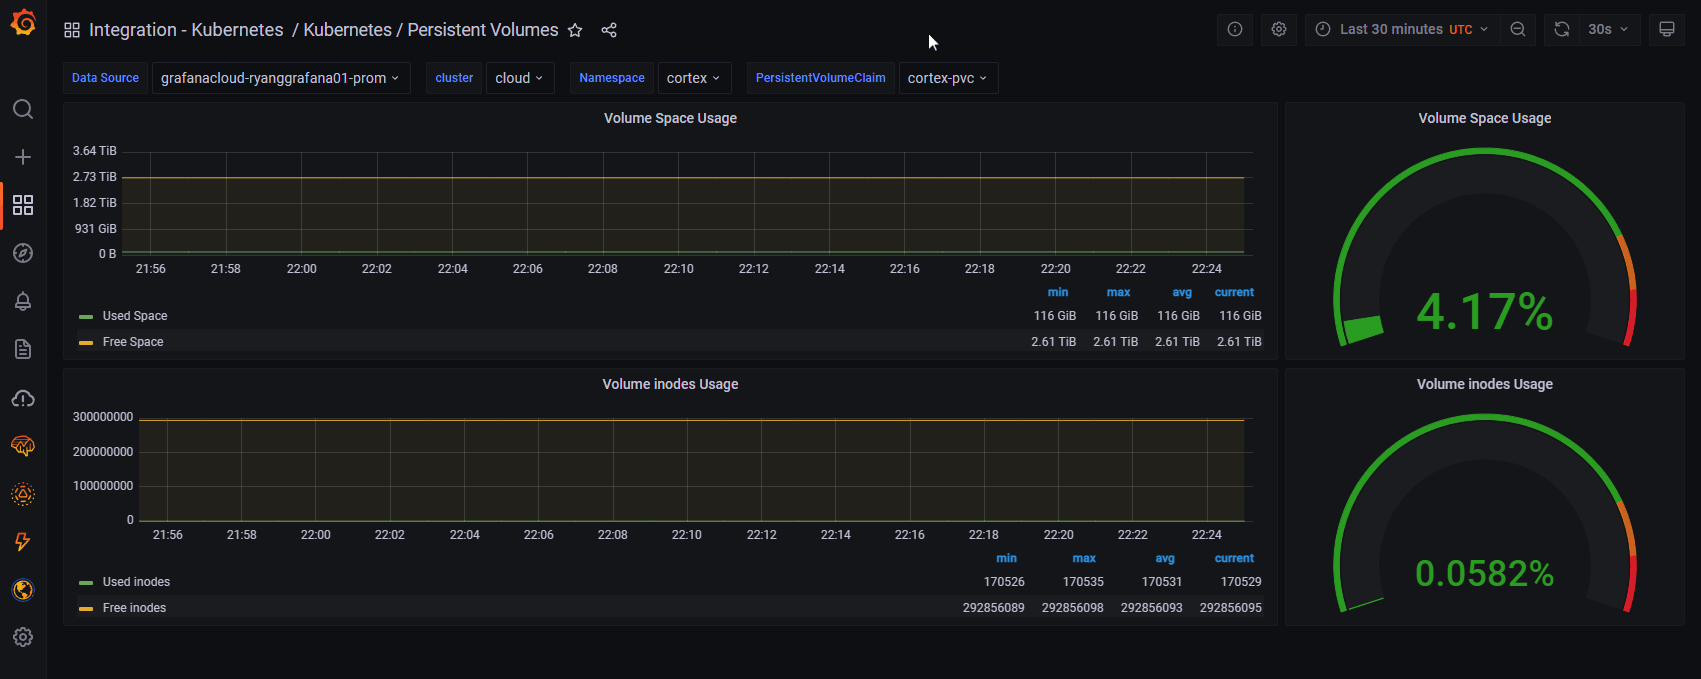 Grafana dashboard for cluster operations in the k8s integration for Grafana Cloud